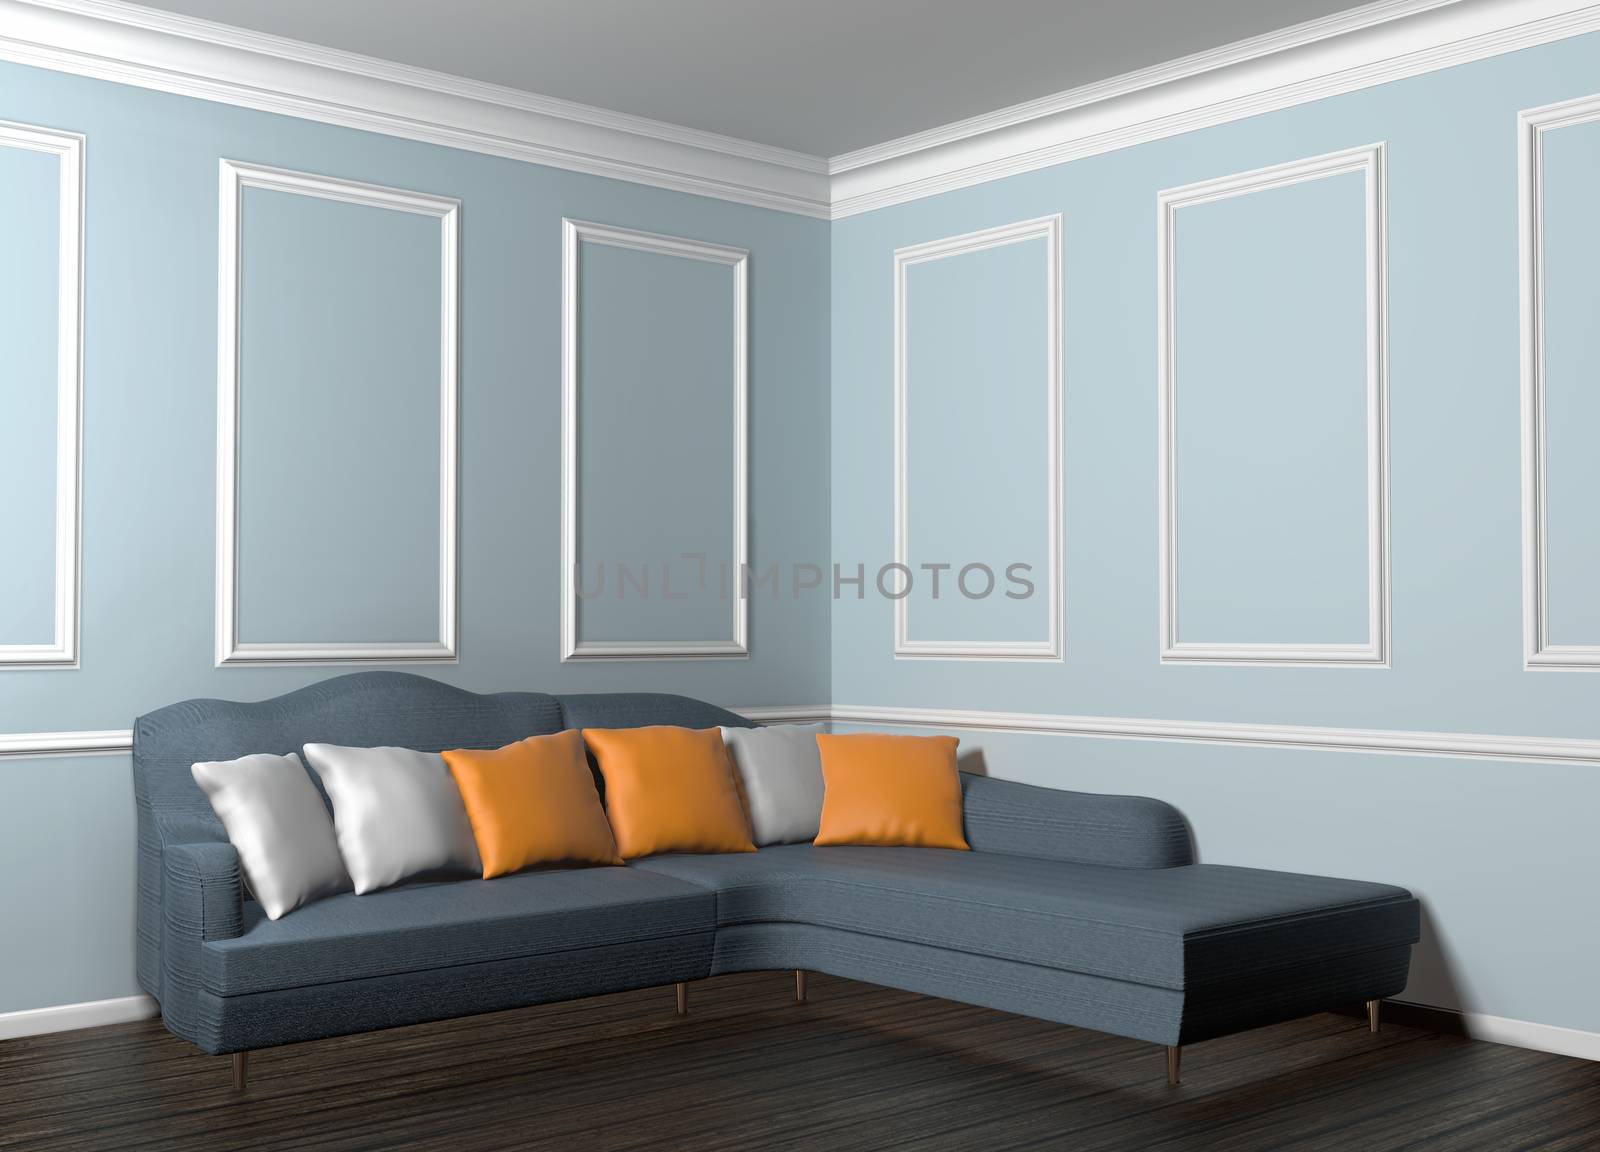 3d illustration of classic interior with sofa full of pillows.